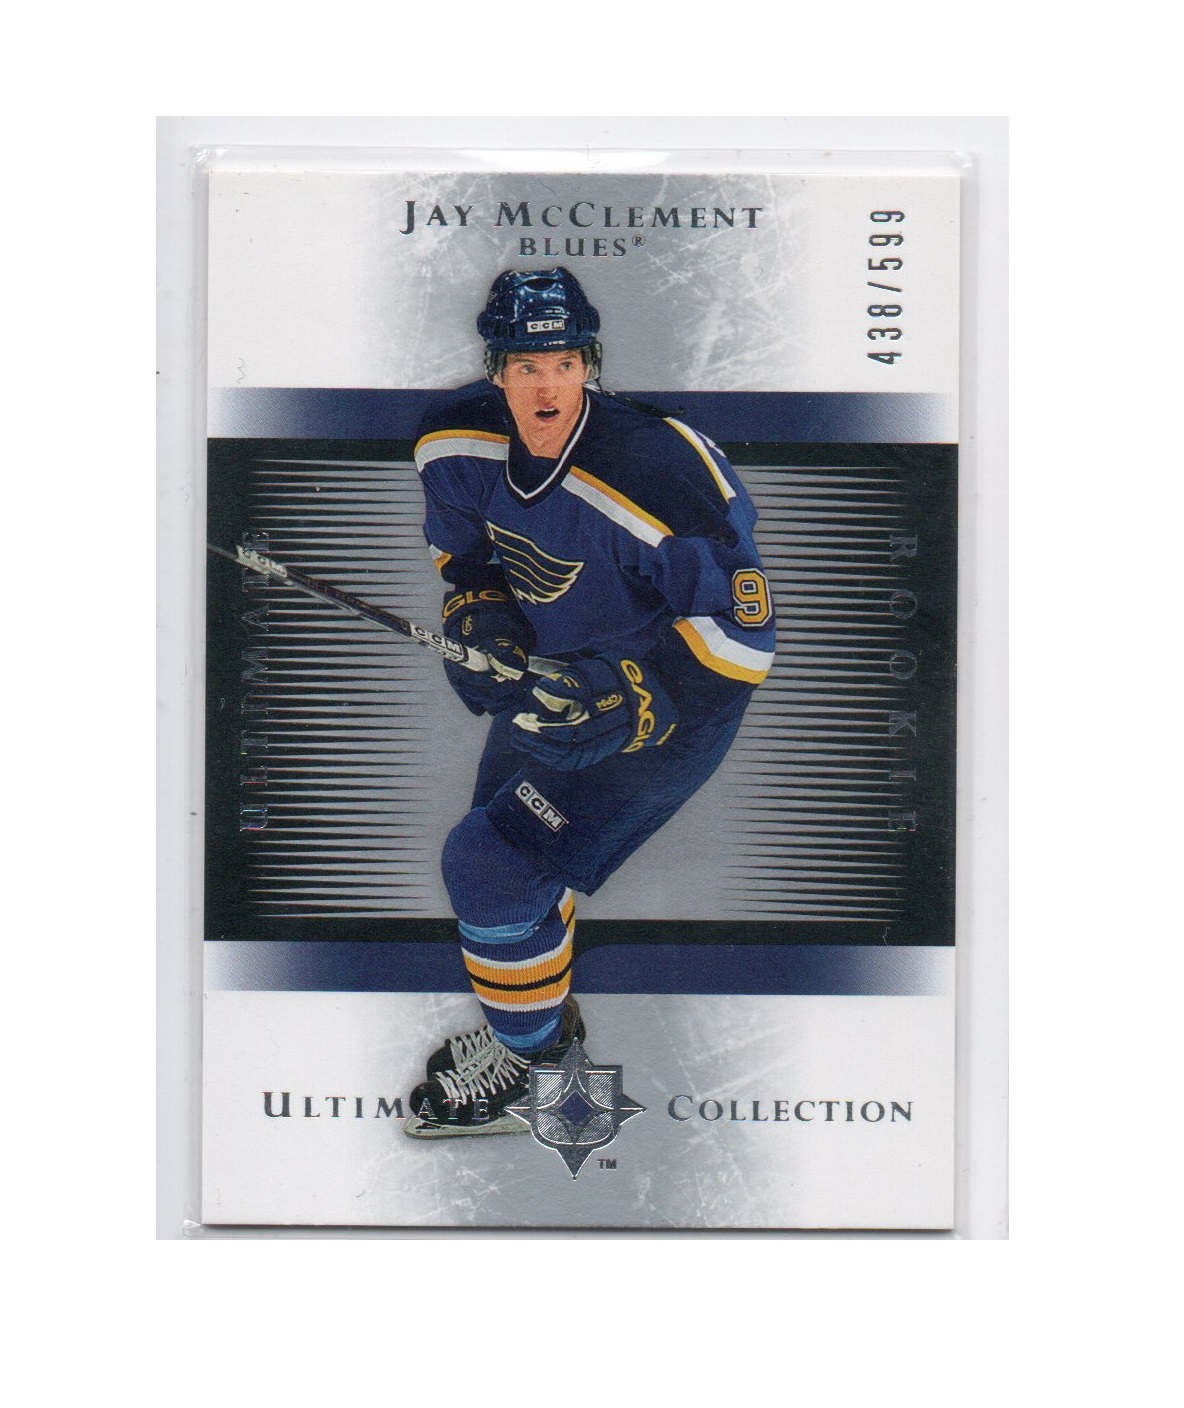 2005-06 Ultimate Collection #167 Jay McClement RC (25-X277-BLUES)